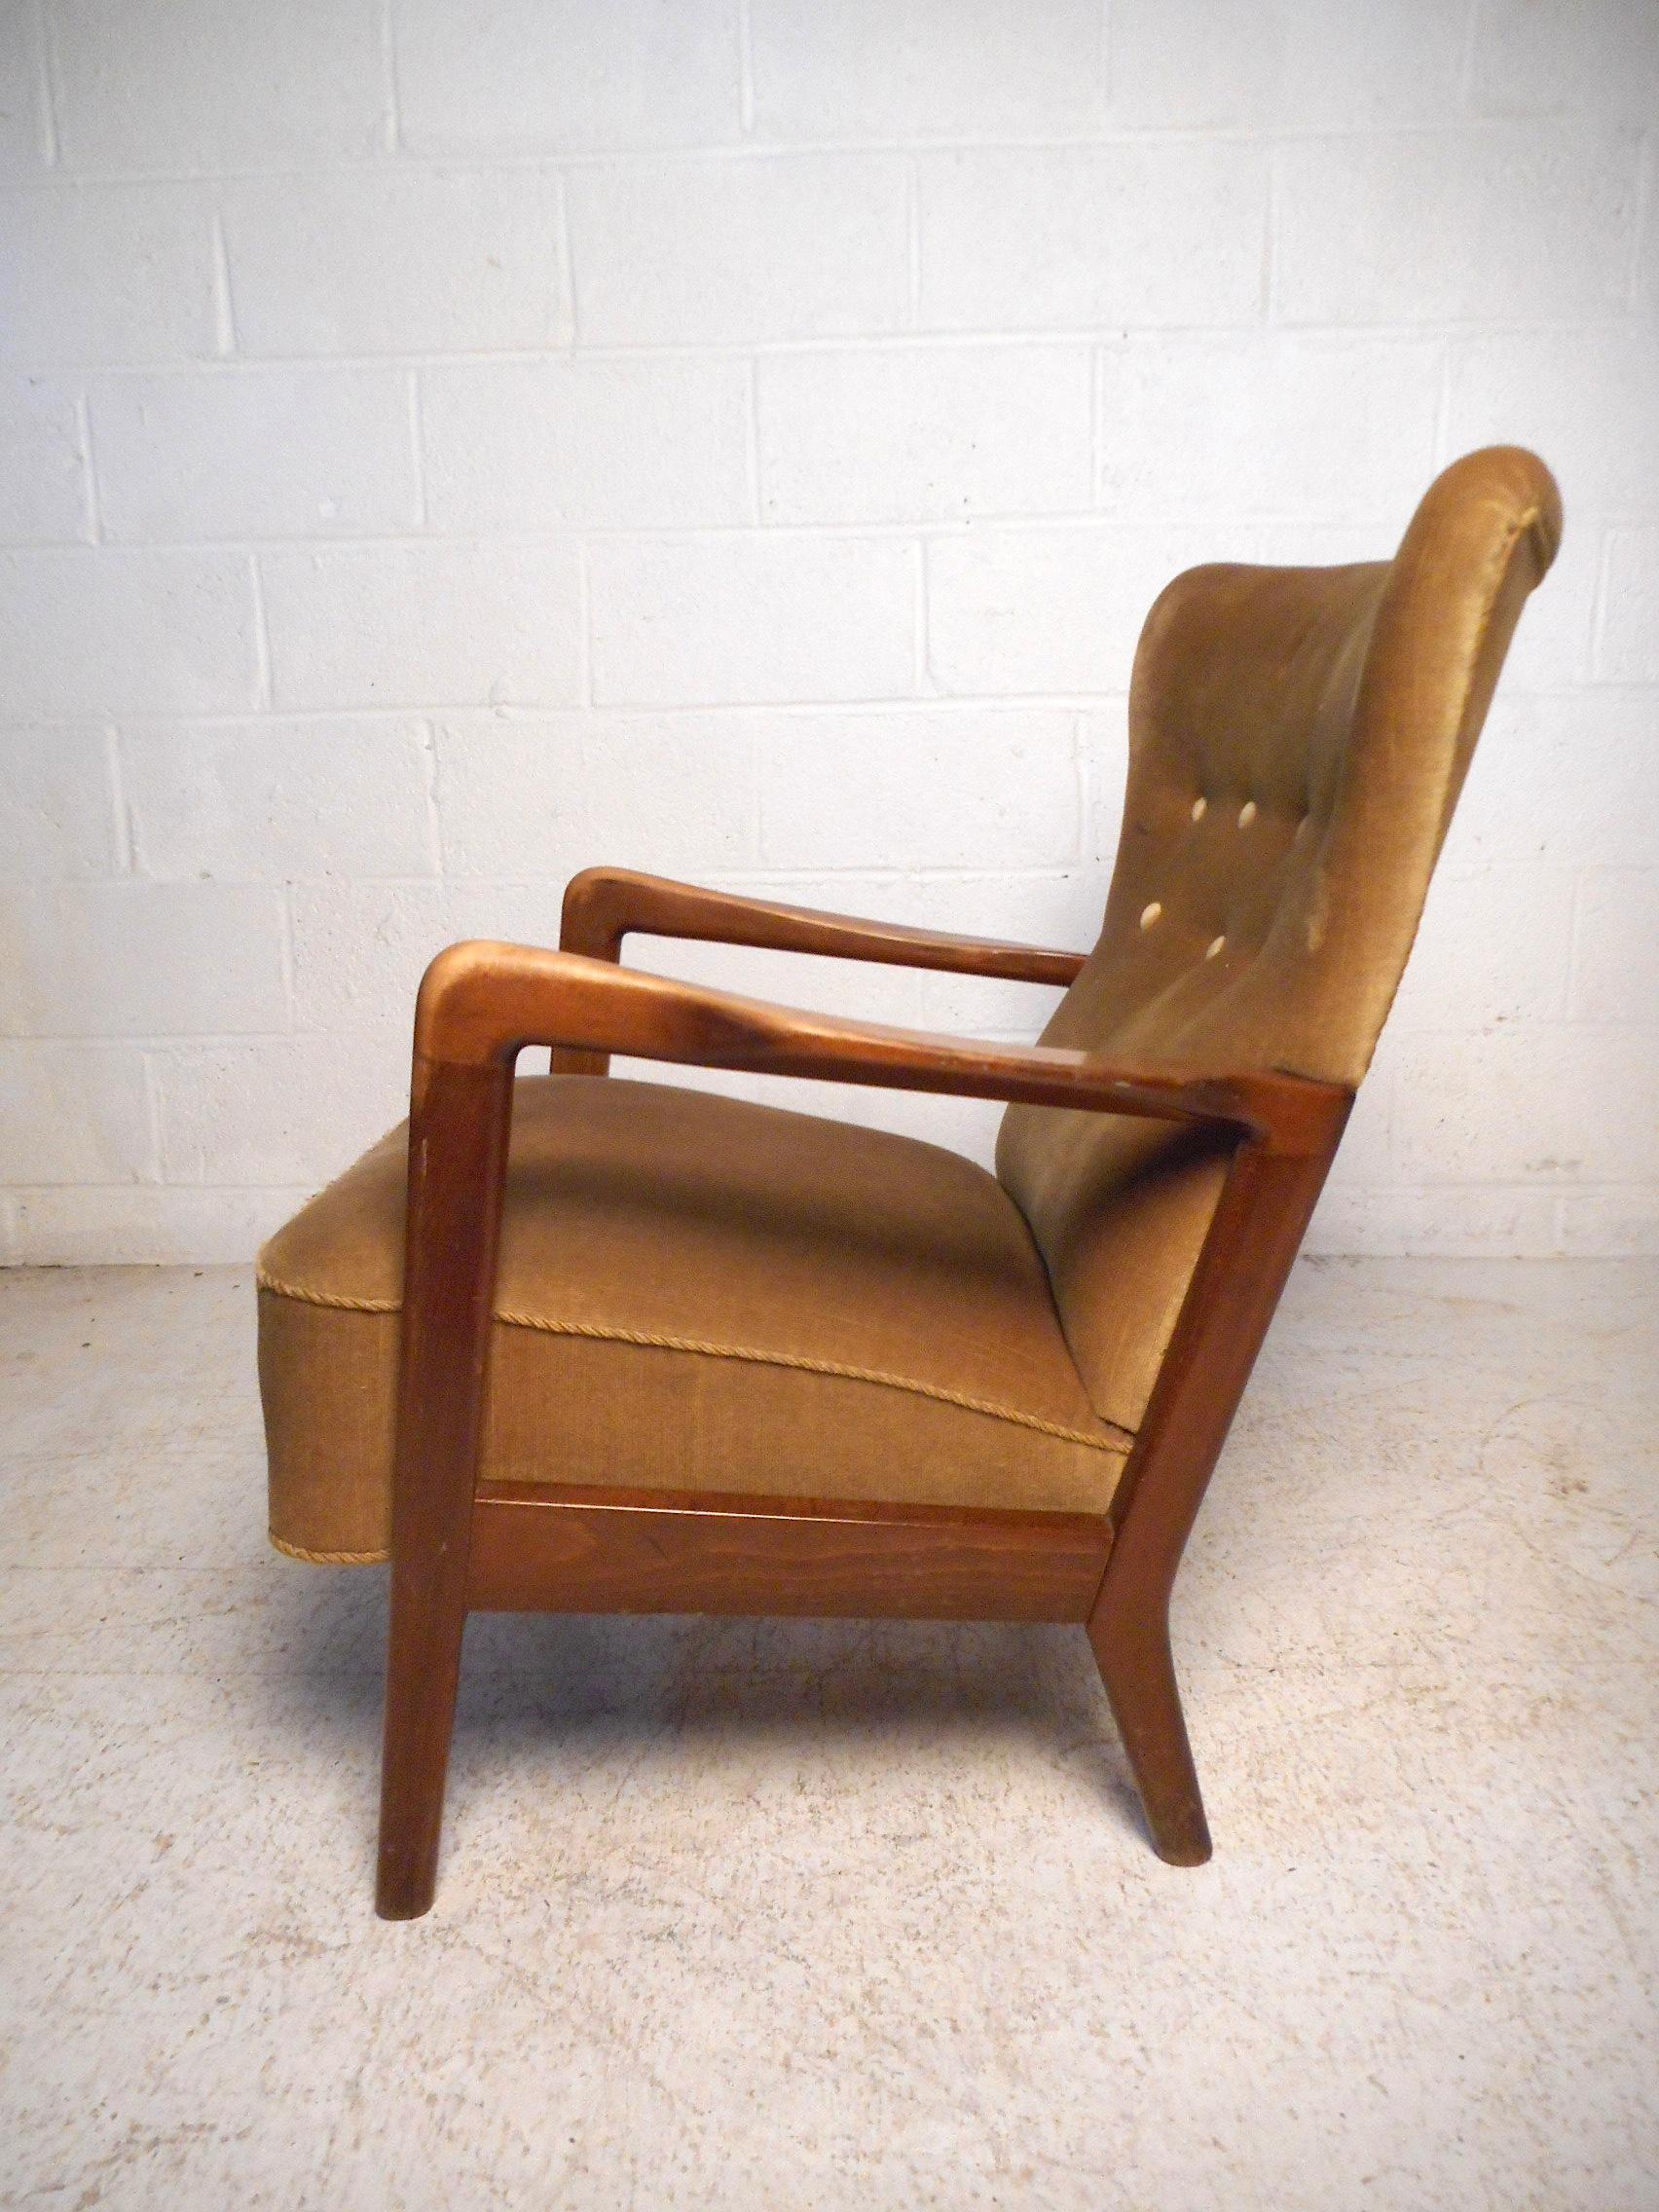 Impressive Danish modern chair designed by Soren Hansen for Fritz Hansen, circa 1950s. Featuring a tall winged back with tufted upholstery, a sleek angular wooden frame with sculpted armrests, and vintage upholstery. An impressive addition to any